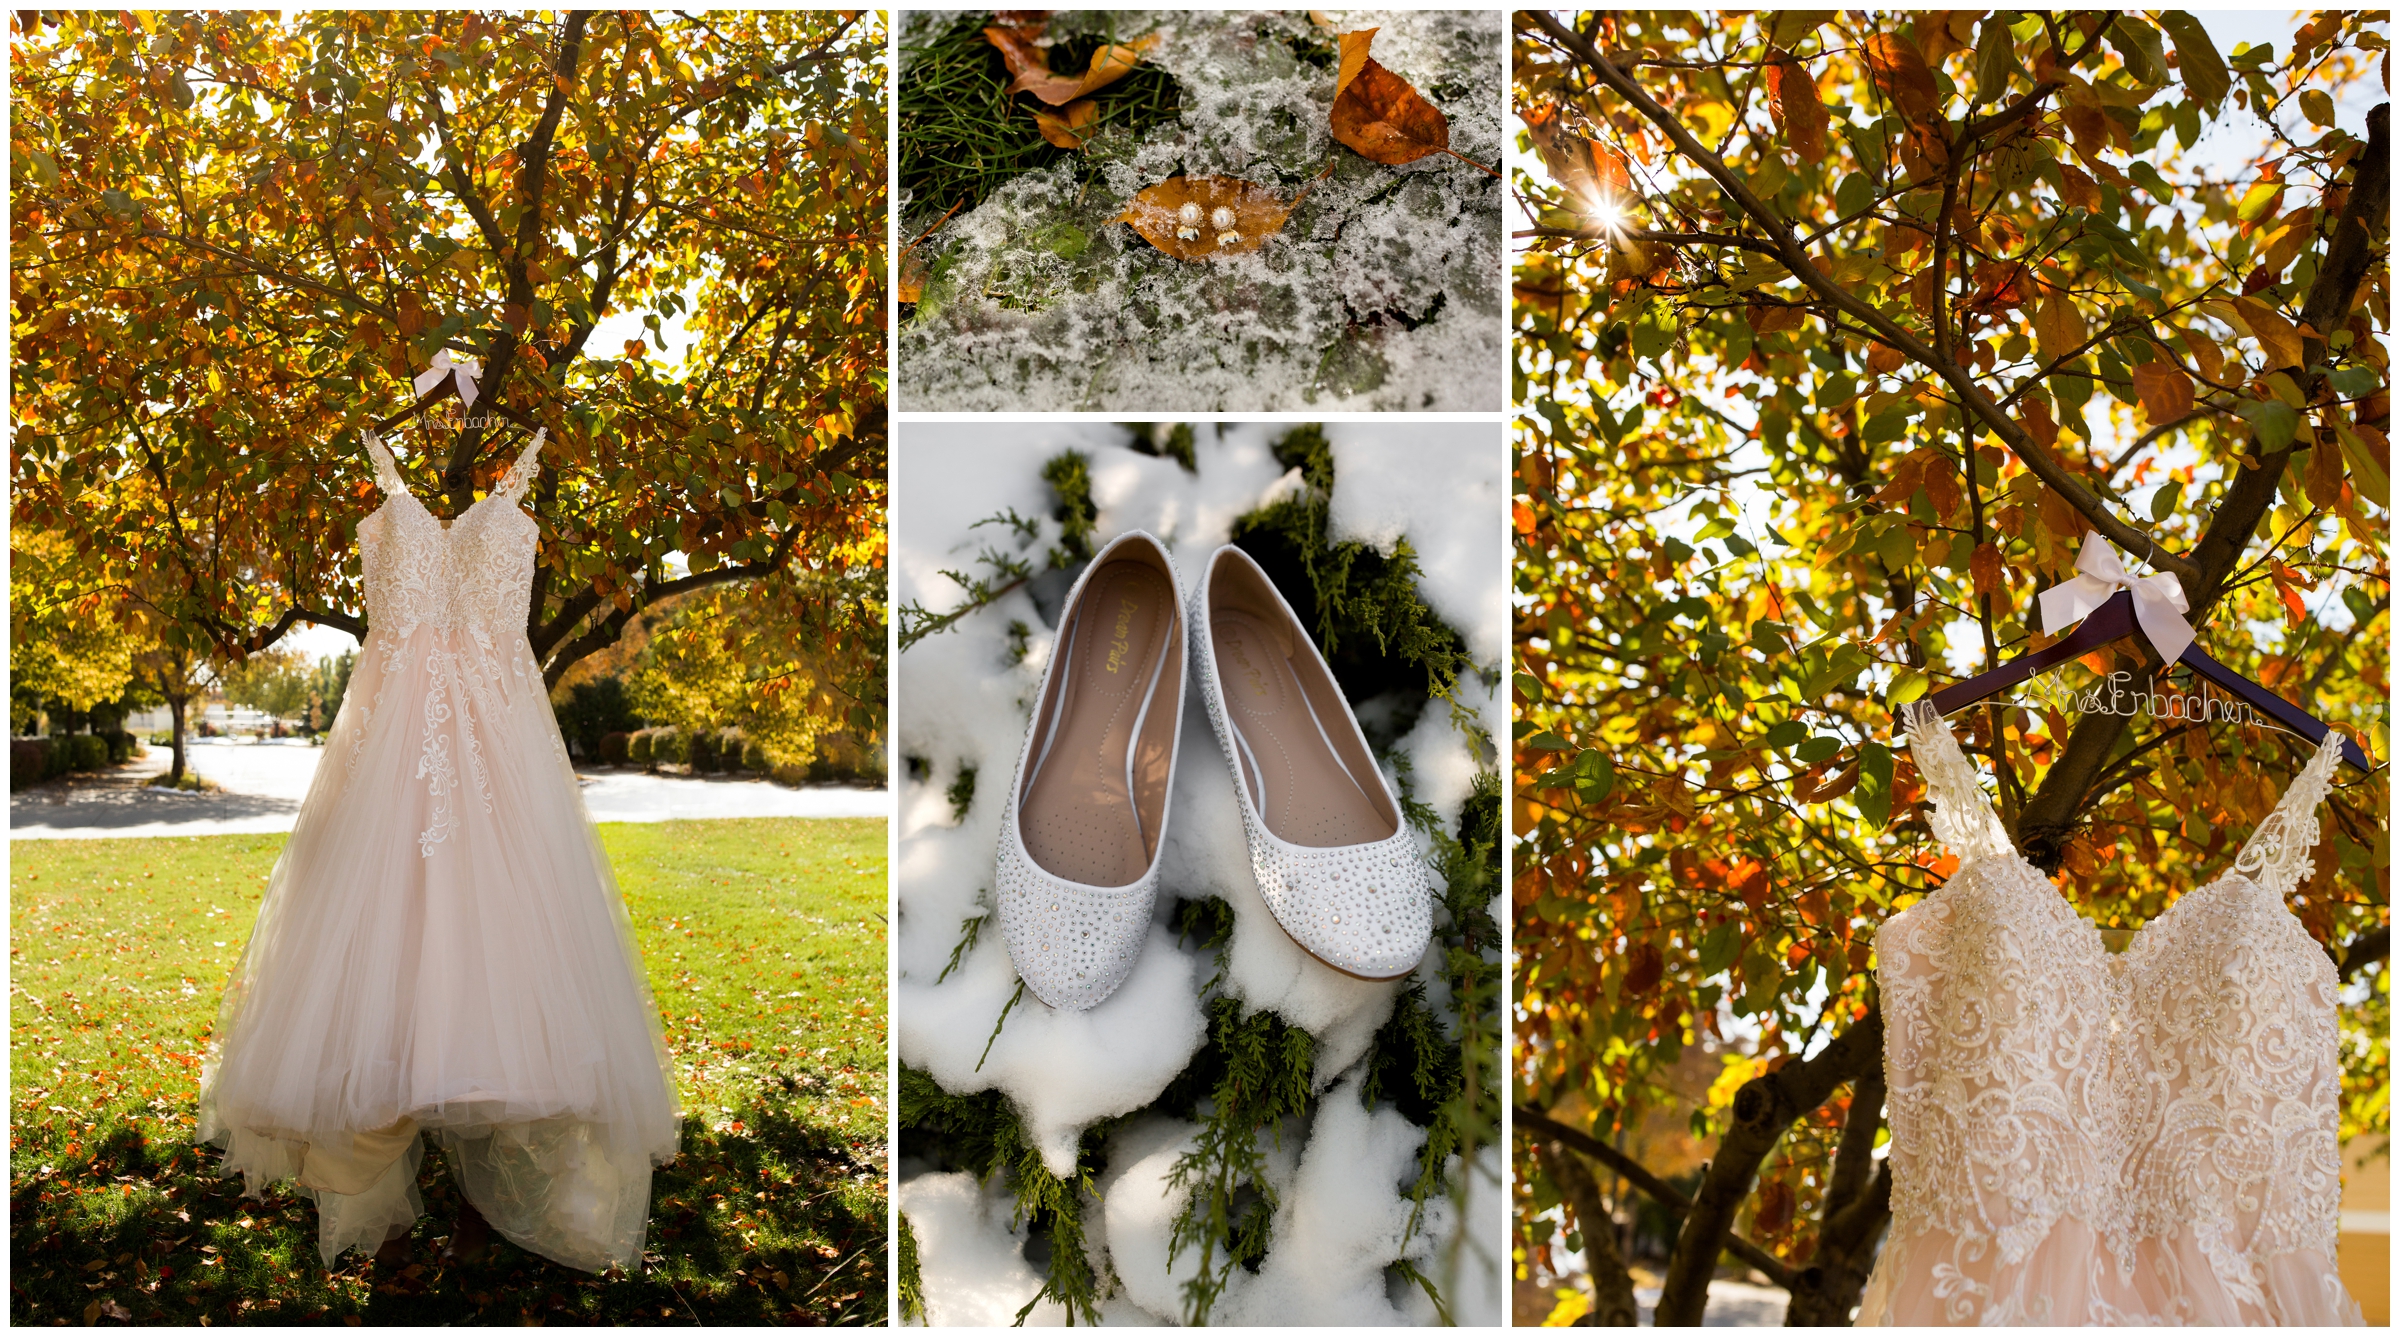 wedding dress in a tree with colorful fall foliage 